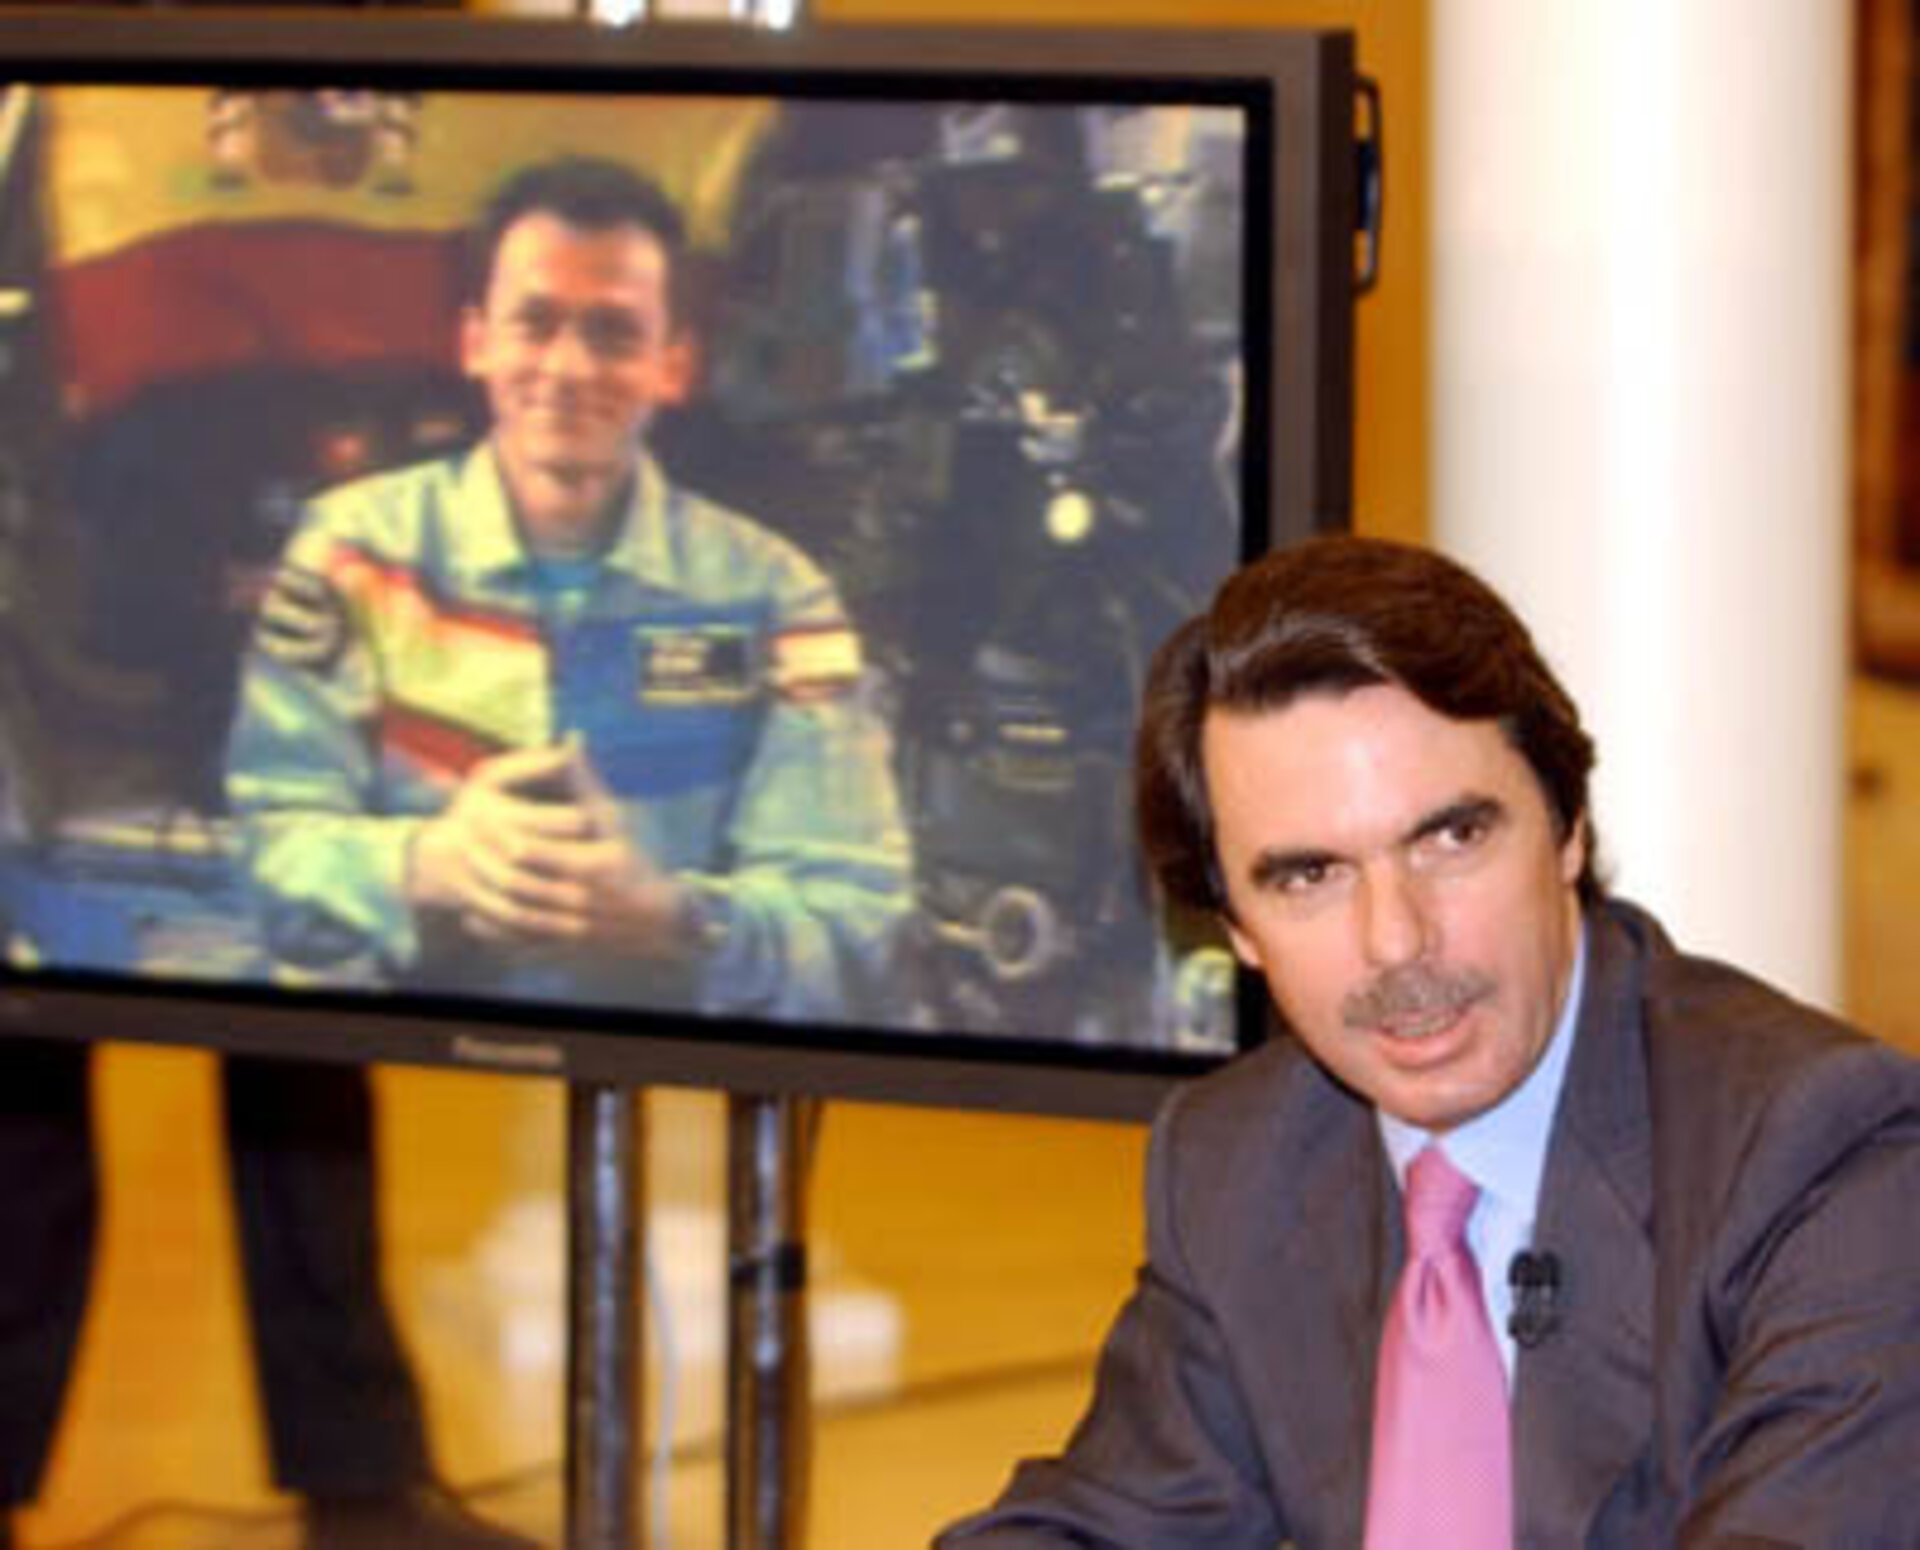 Spain's Prime Minister Jose Maria Aznar spoke to Pedro from the Moncloa Palace in Madrid